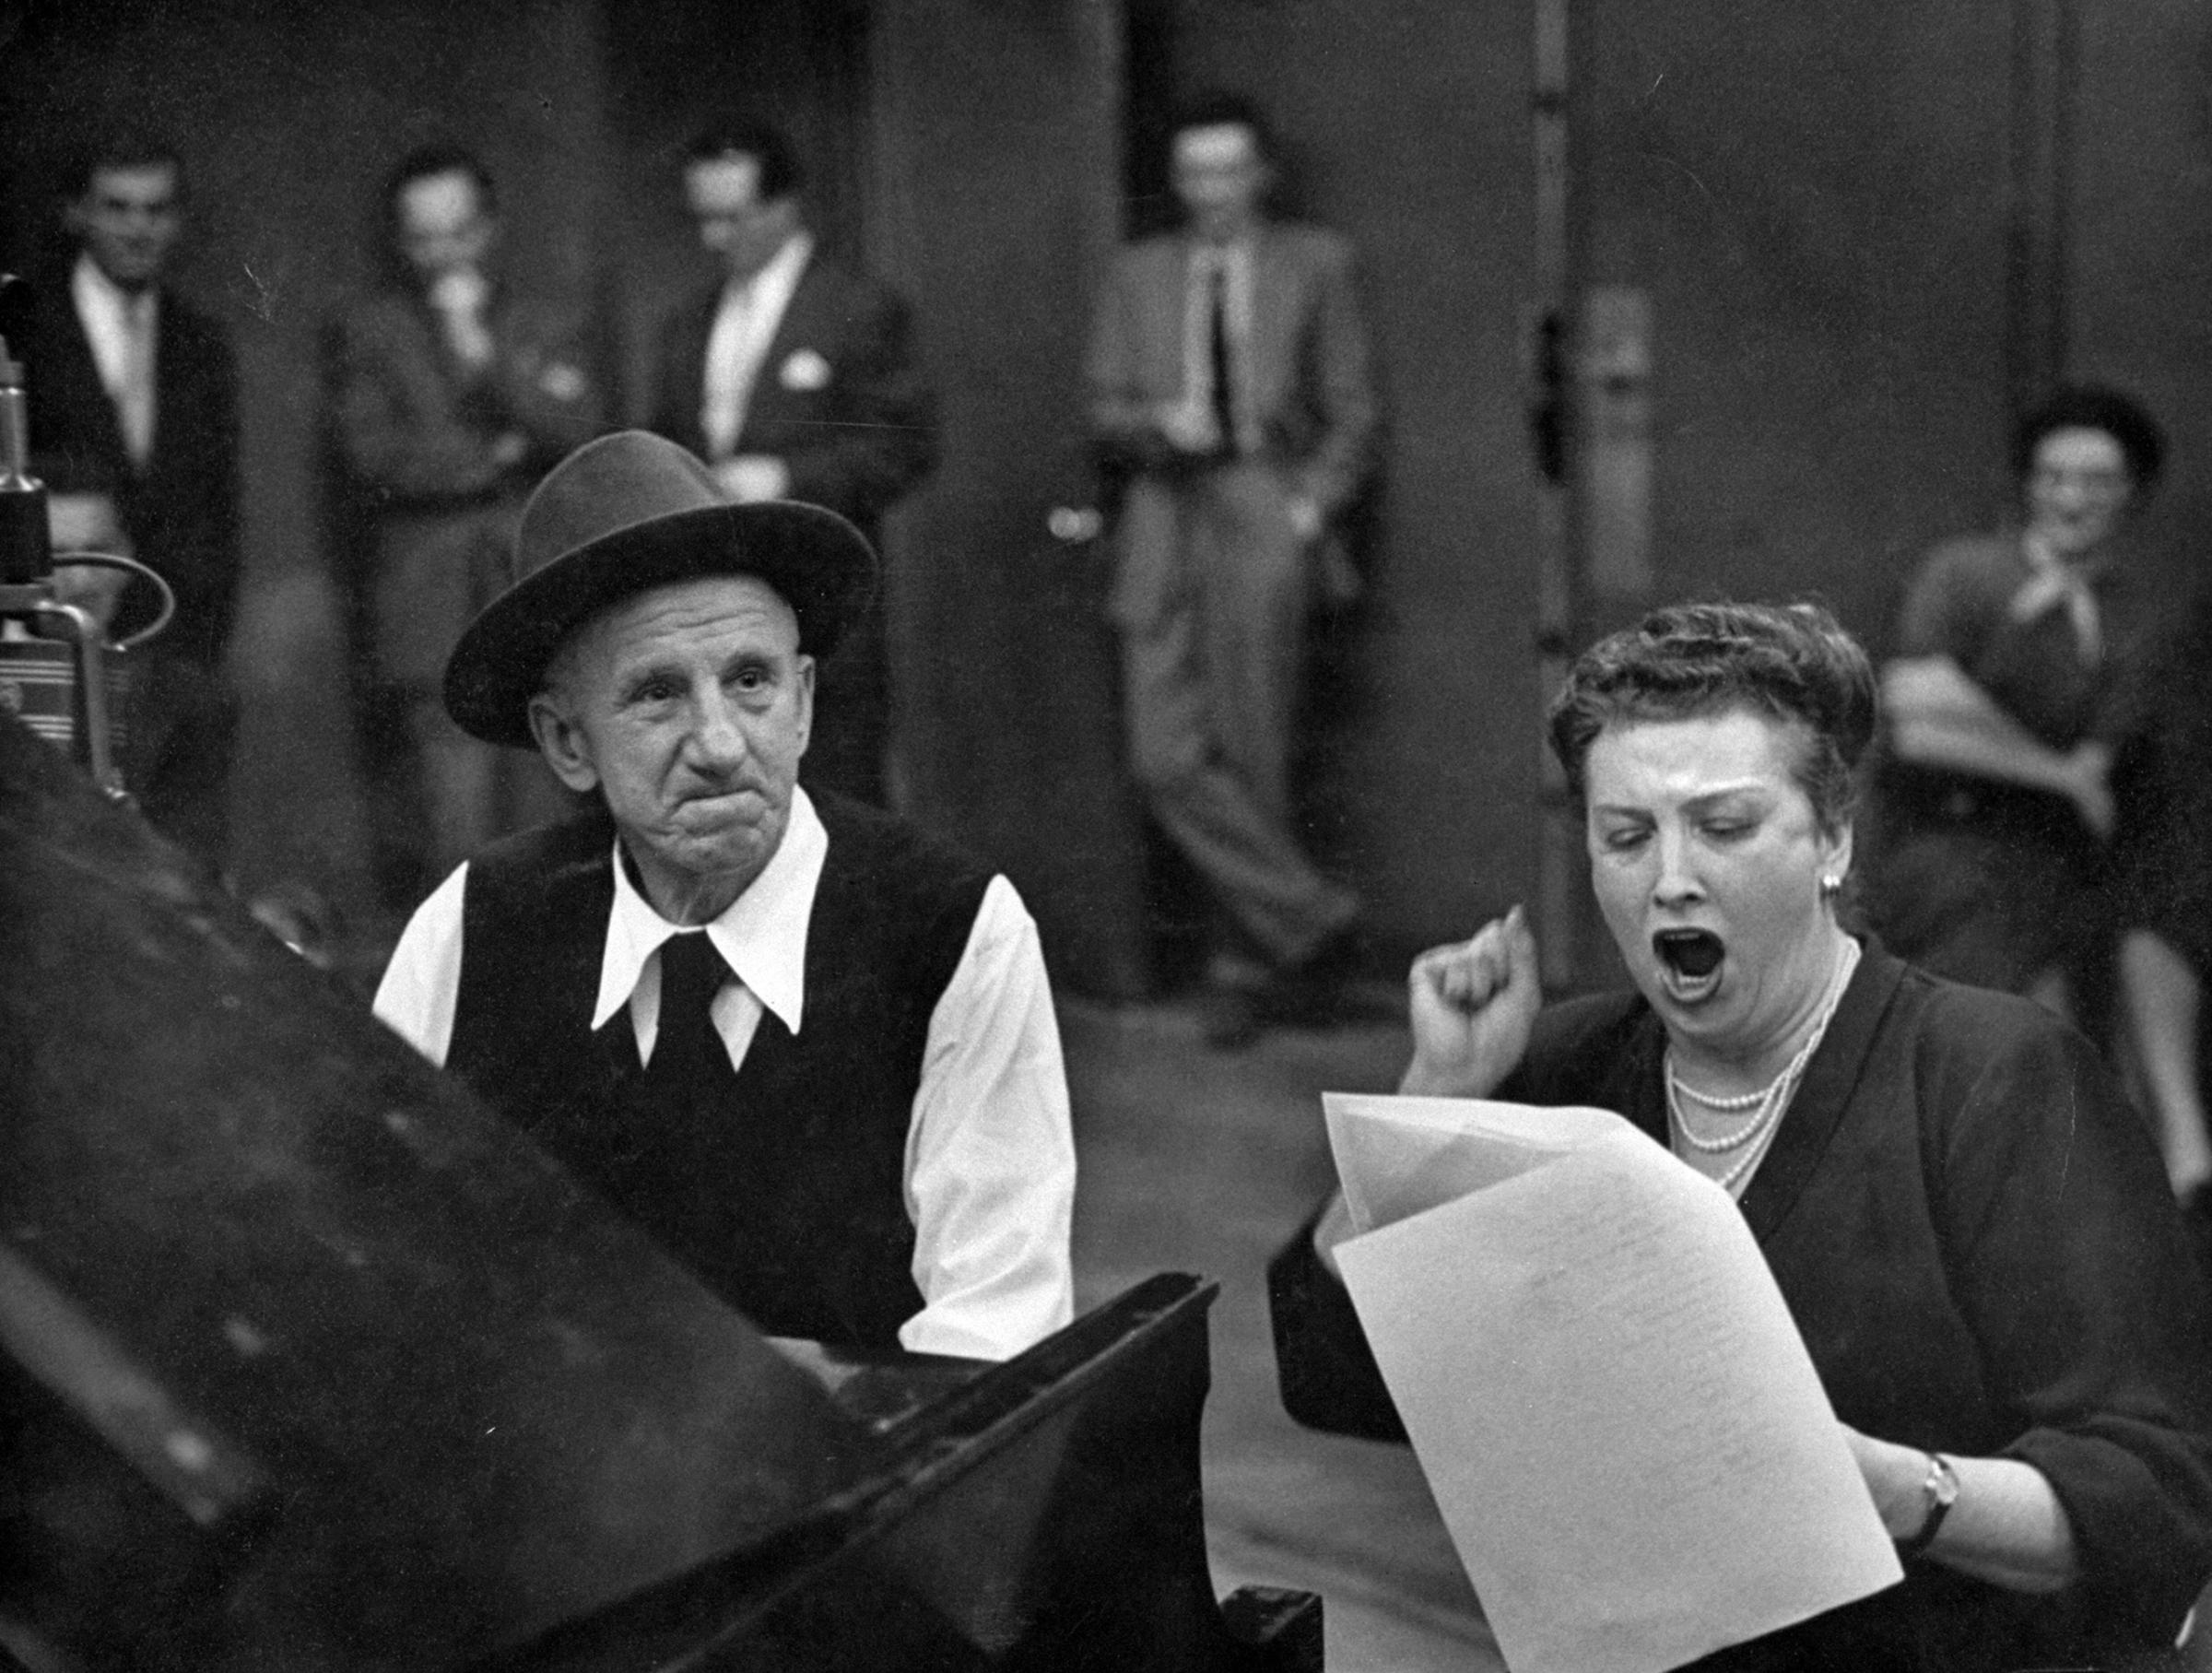 Comedian and opera star, Jimmy Durante and Helen Traubel, join in A Real Piano Player. Jimmy was serious during his duet with a high-brow artist.